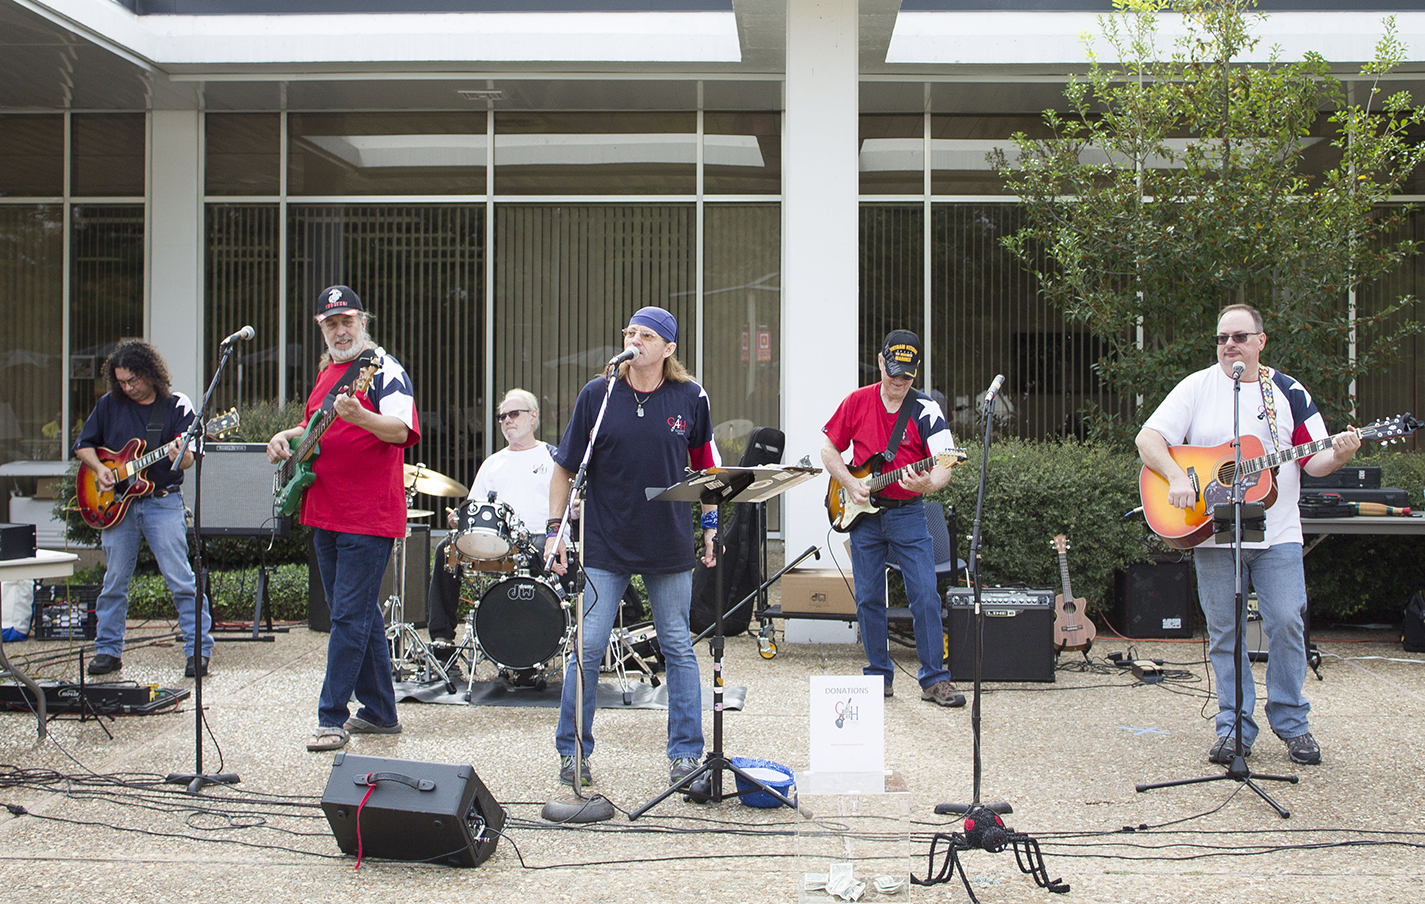 Guitars for Heroes performs at the Veterans Week Celebration Nov. 6 on South Campus. The program helps veterans overcome difficulties through music and other activities.